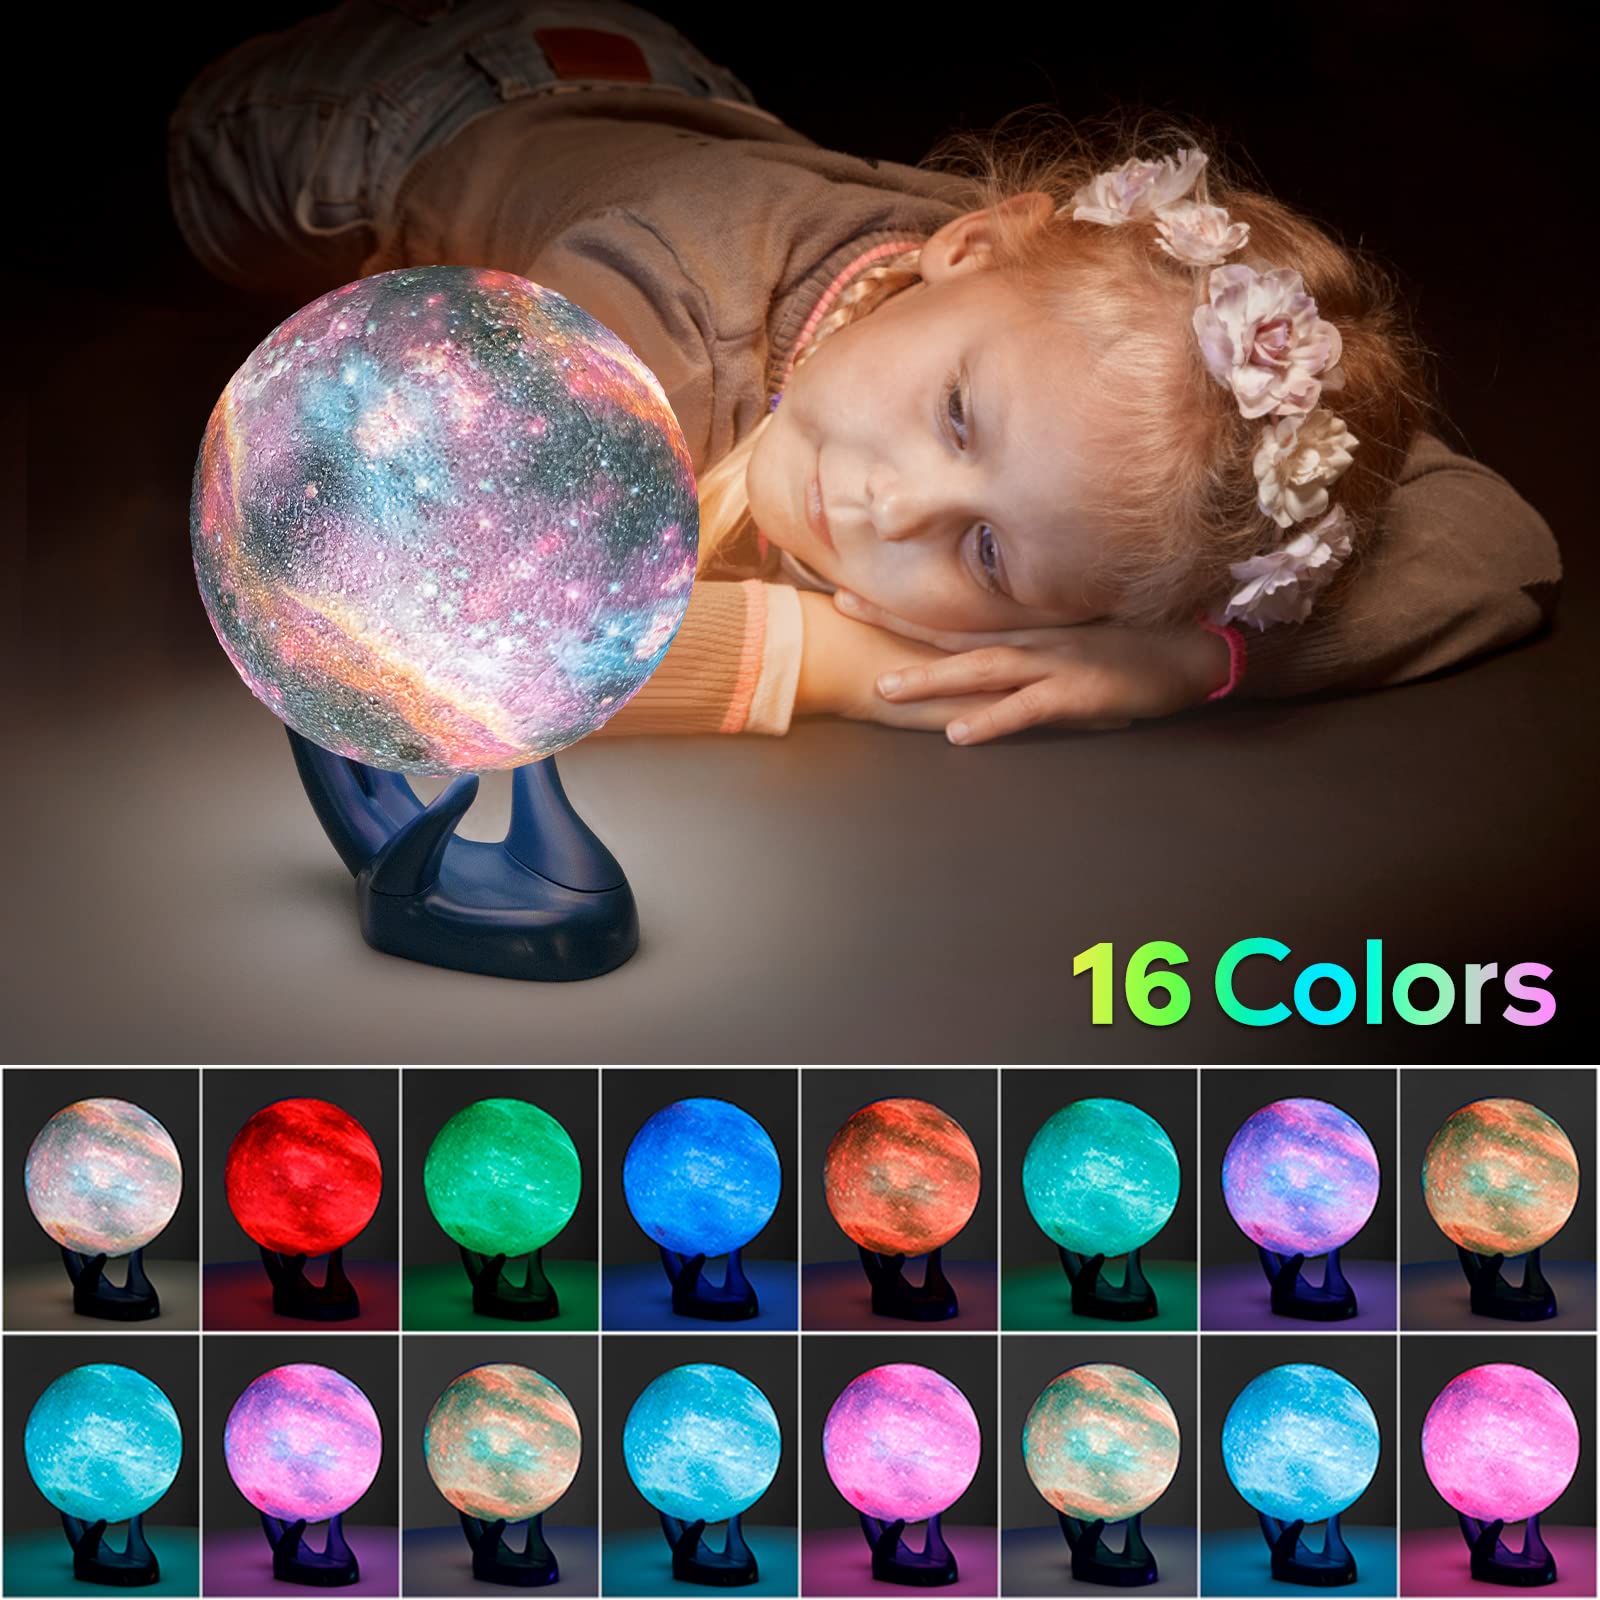 BRIGHTWORLD Moon Lamp 3D Printing Galaxy Lamp 4.7inch Moon Light 16 Colors Night Light for Kids, Remote & Touch Control Dimmable Birthday Gifts